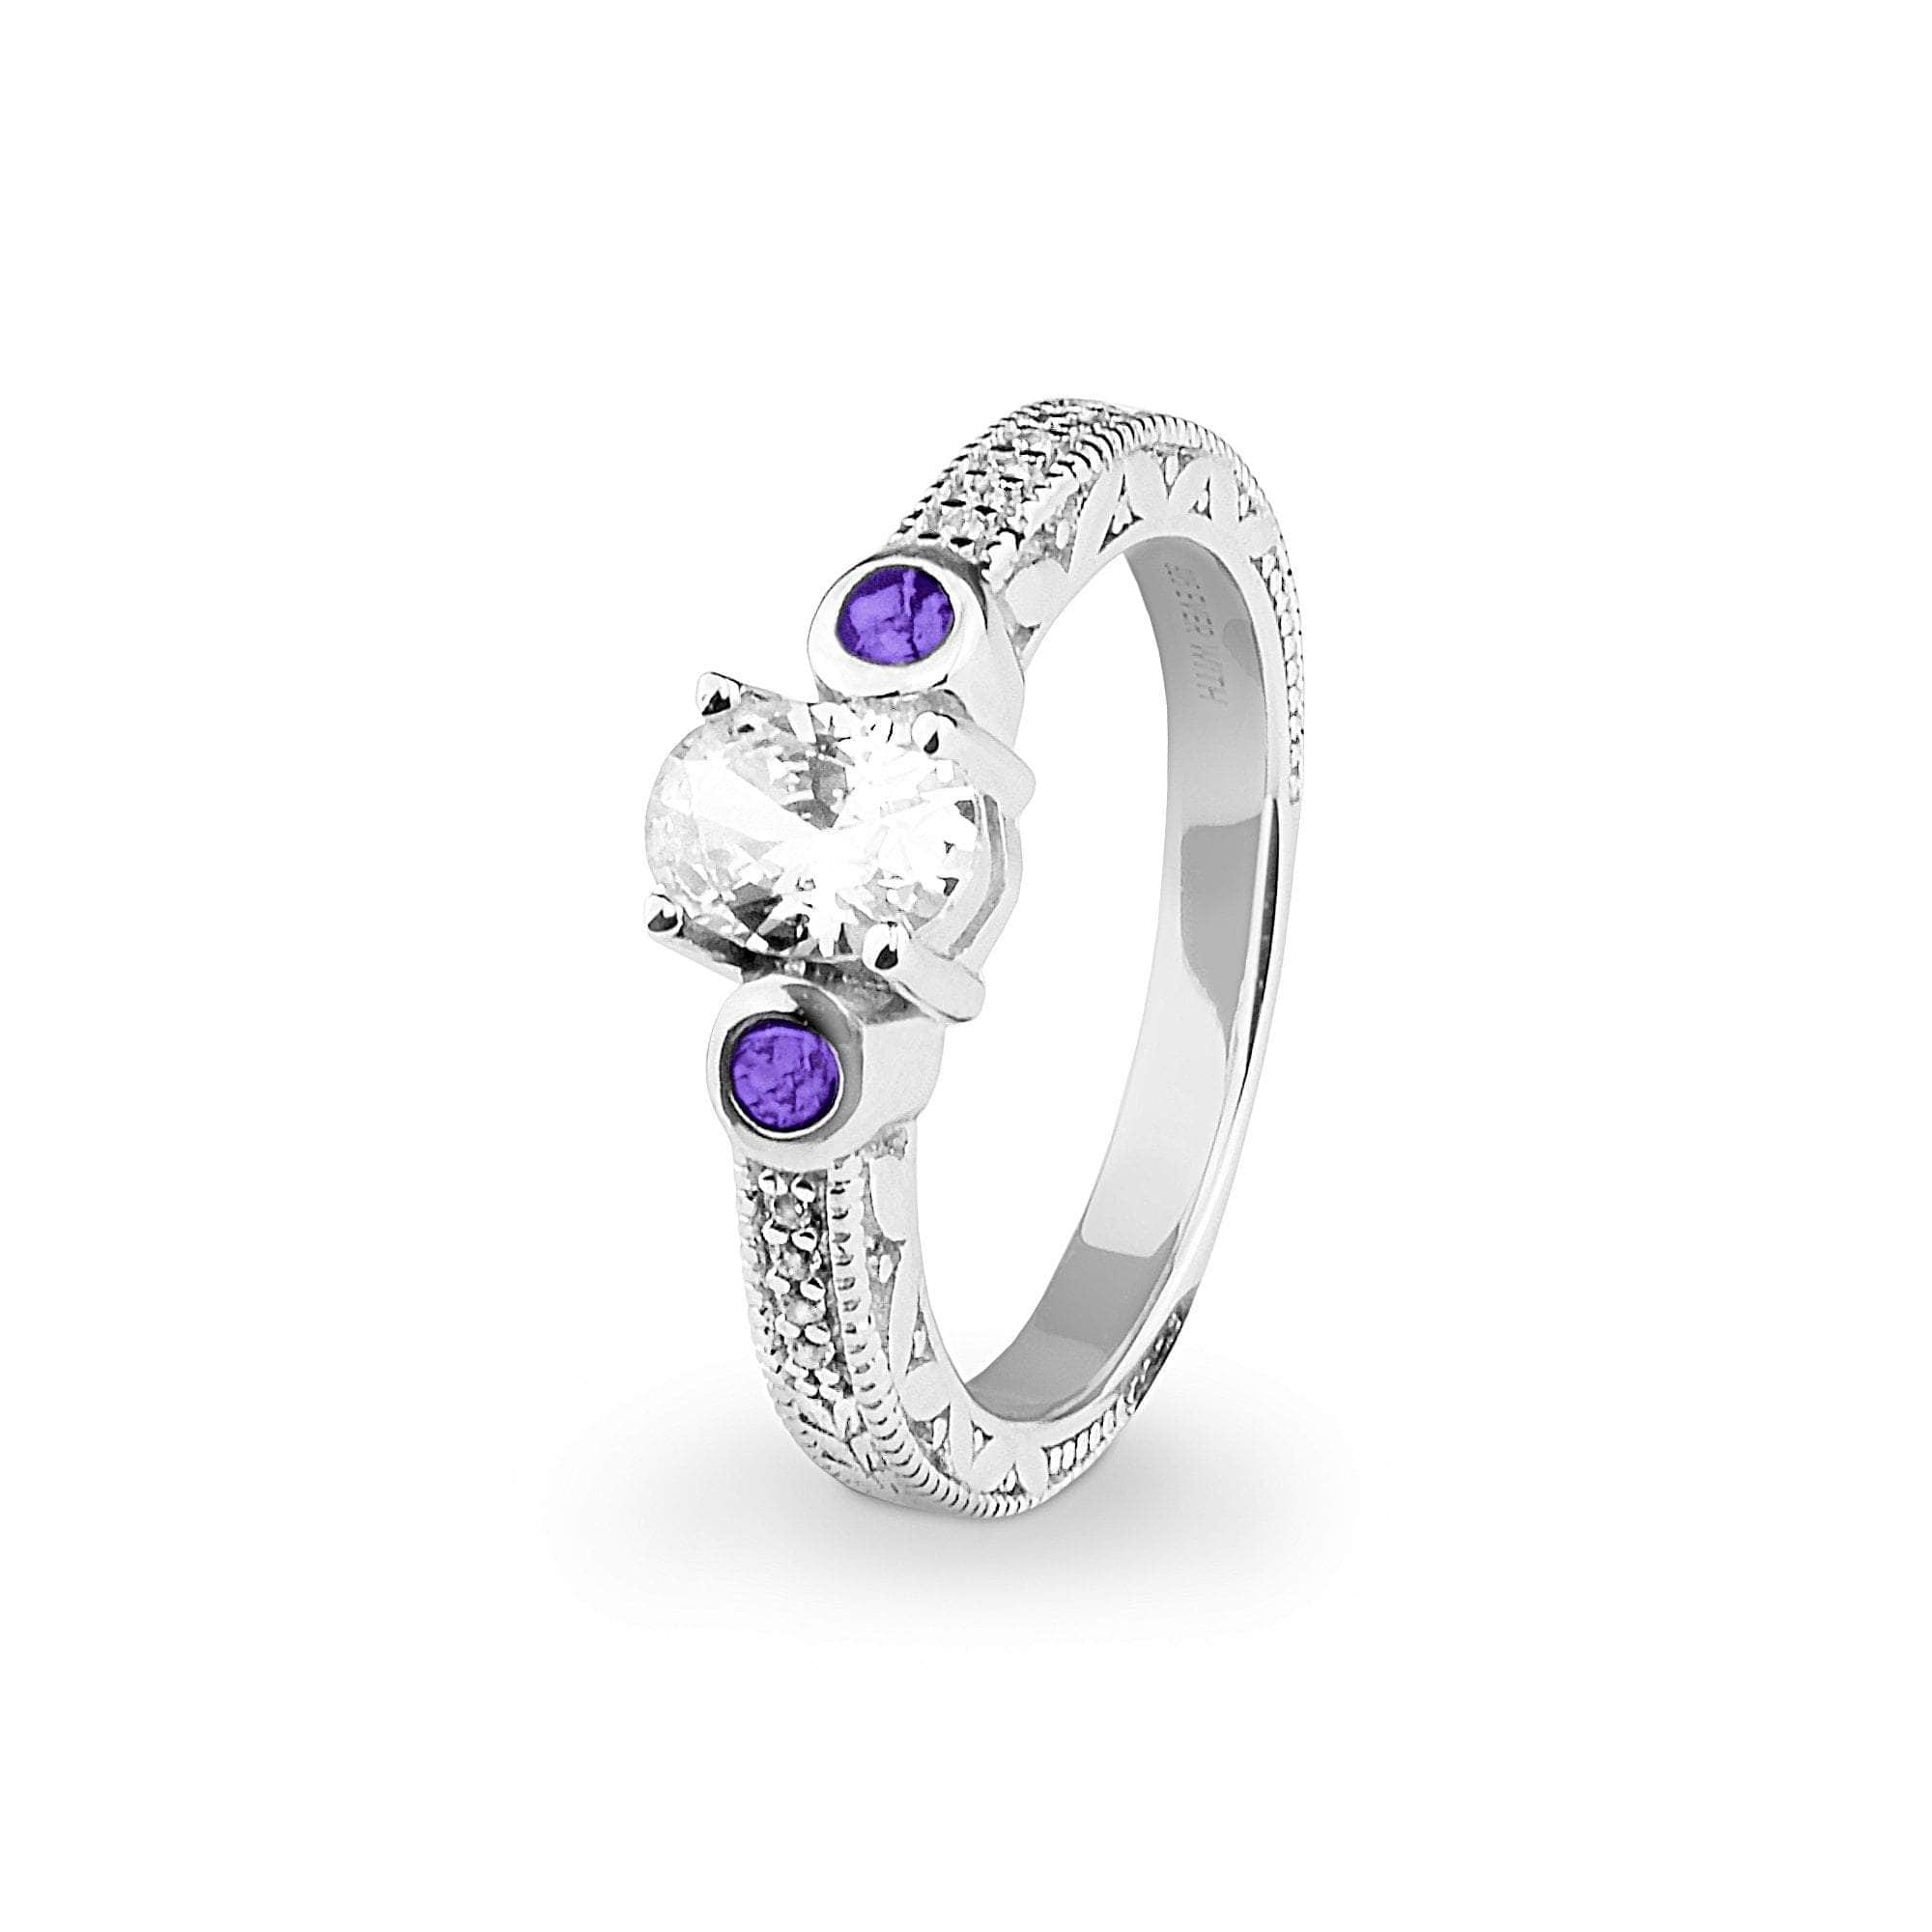 Ladies Serenity Memorial Ashes Ring with Fine Crystals